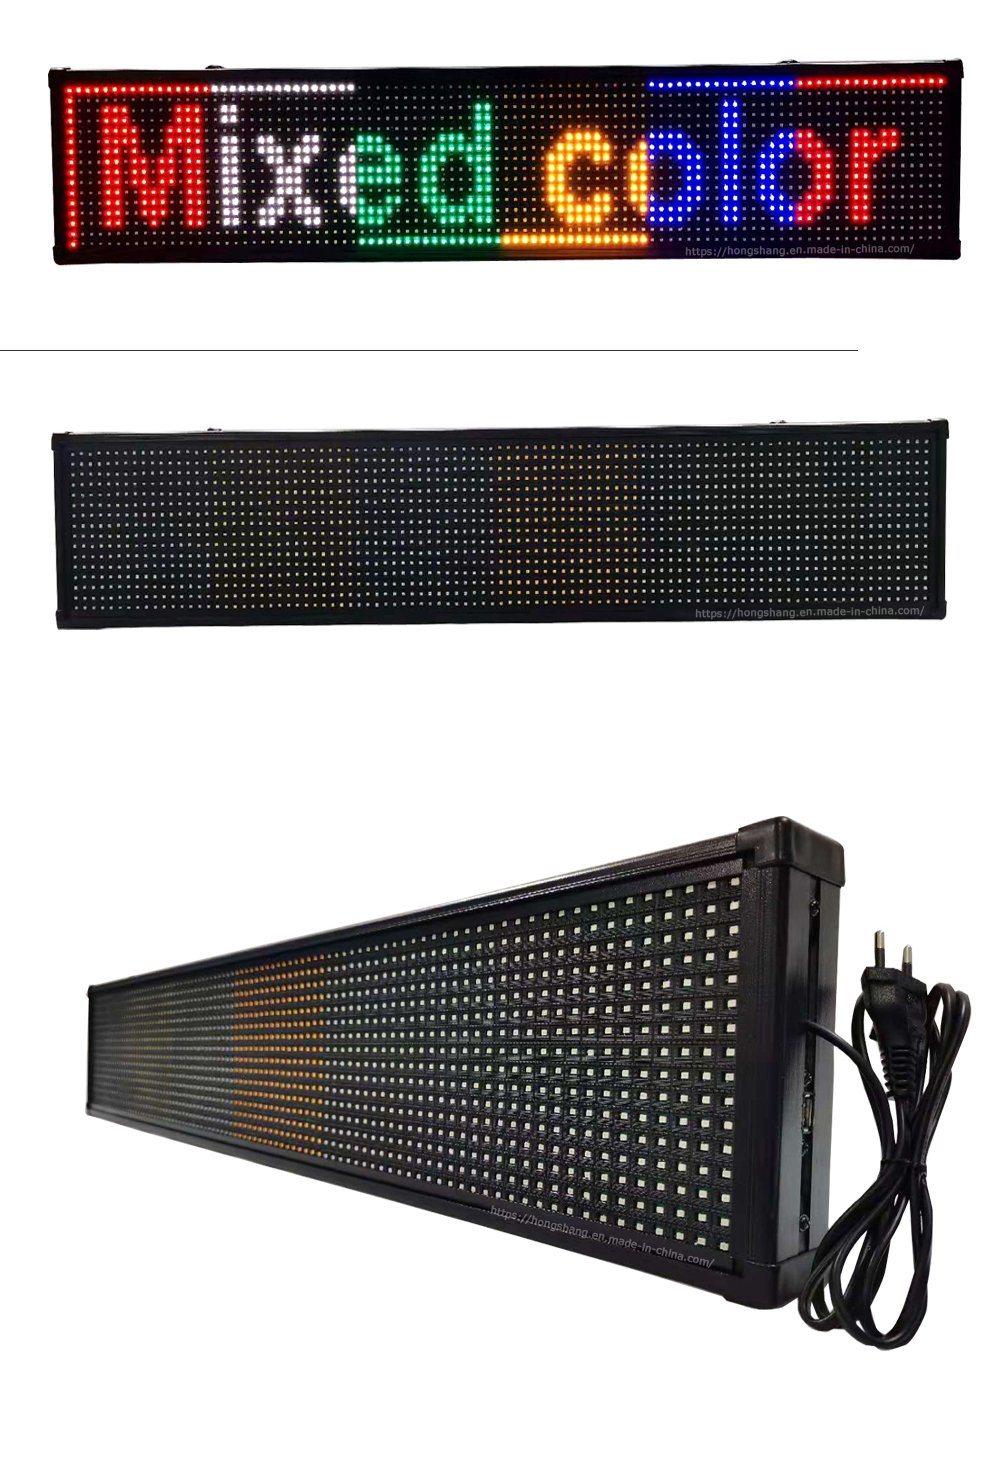 Best-Selling Window Multifunctional Mixed-Color Ad Text Edit Signage LED Display